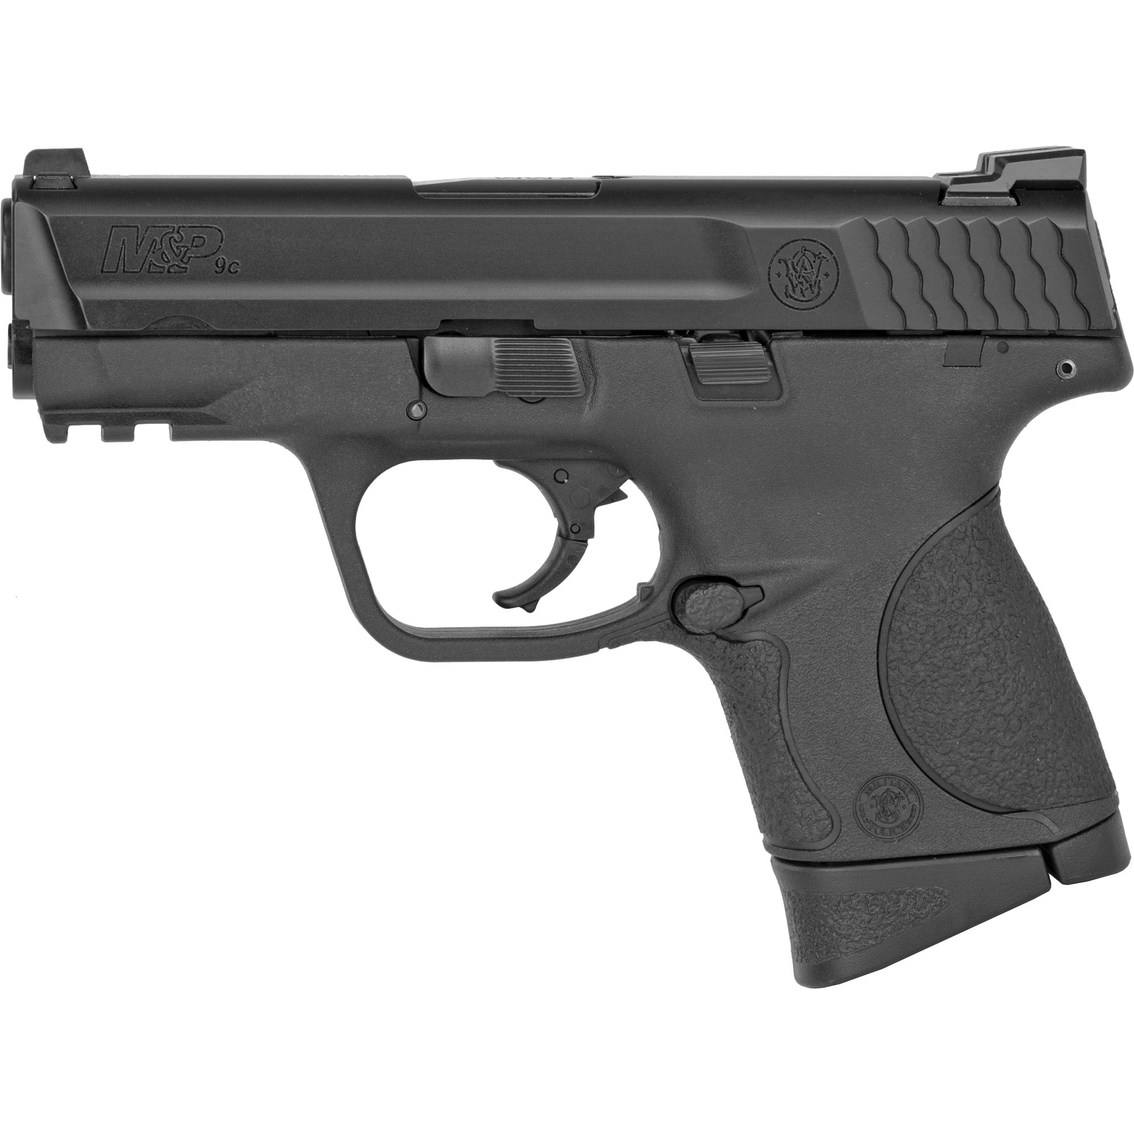 S&W M&P Compact 9MM 3.5 in. Barrel 12 Rds 3-Mags Pistol Black - Image 2 of 3